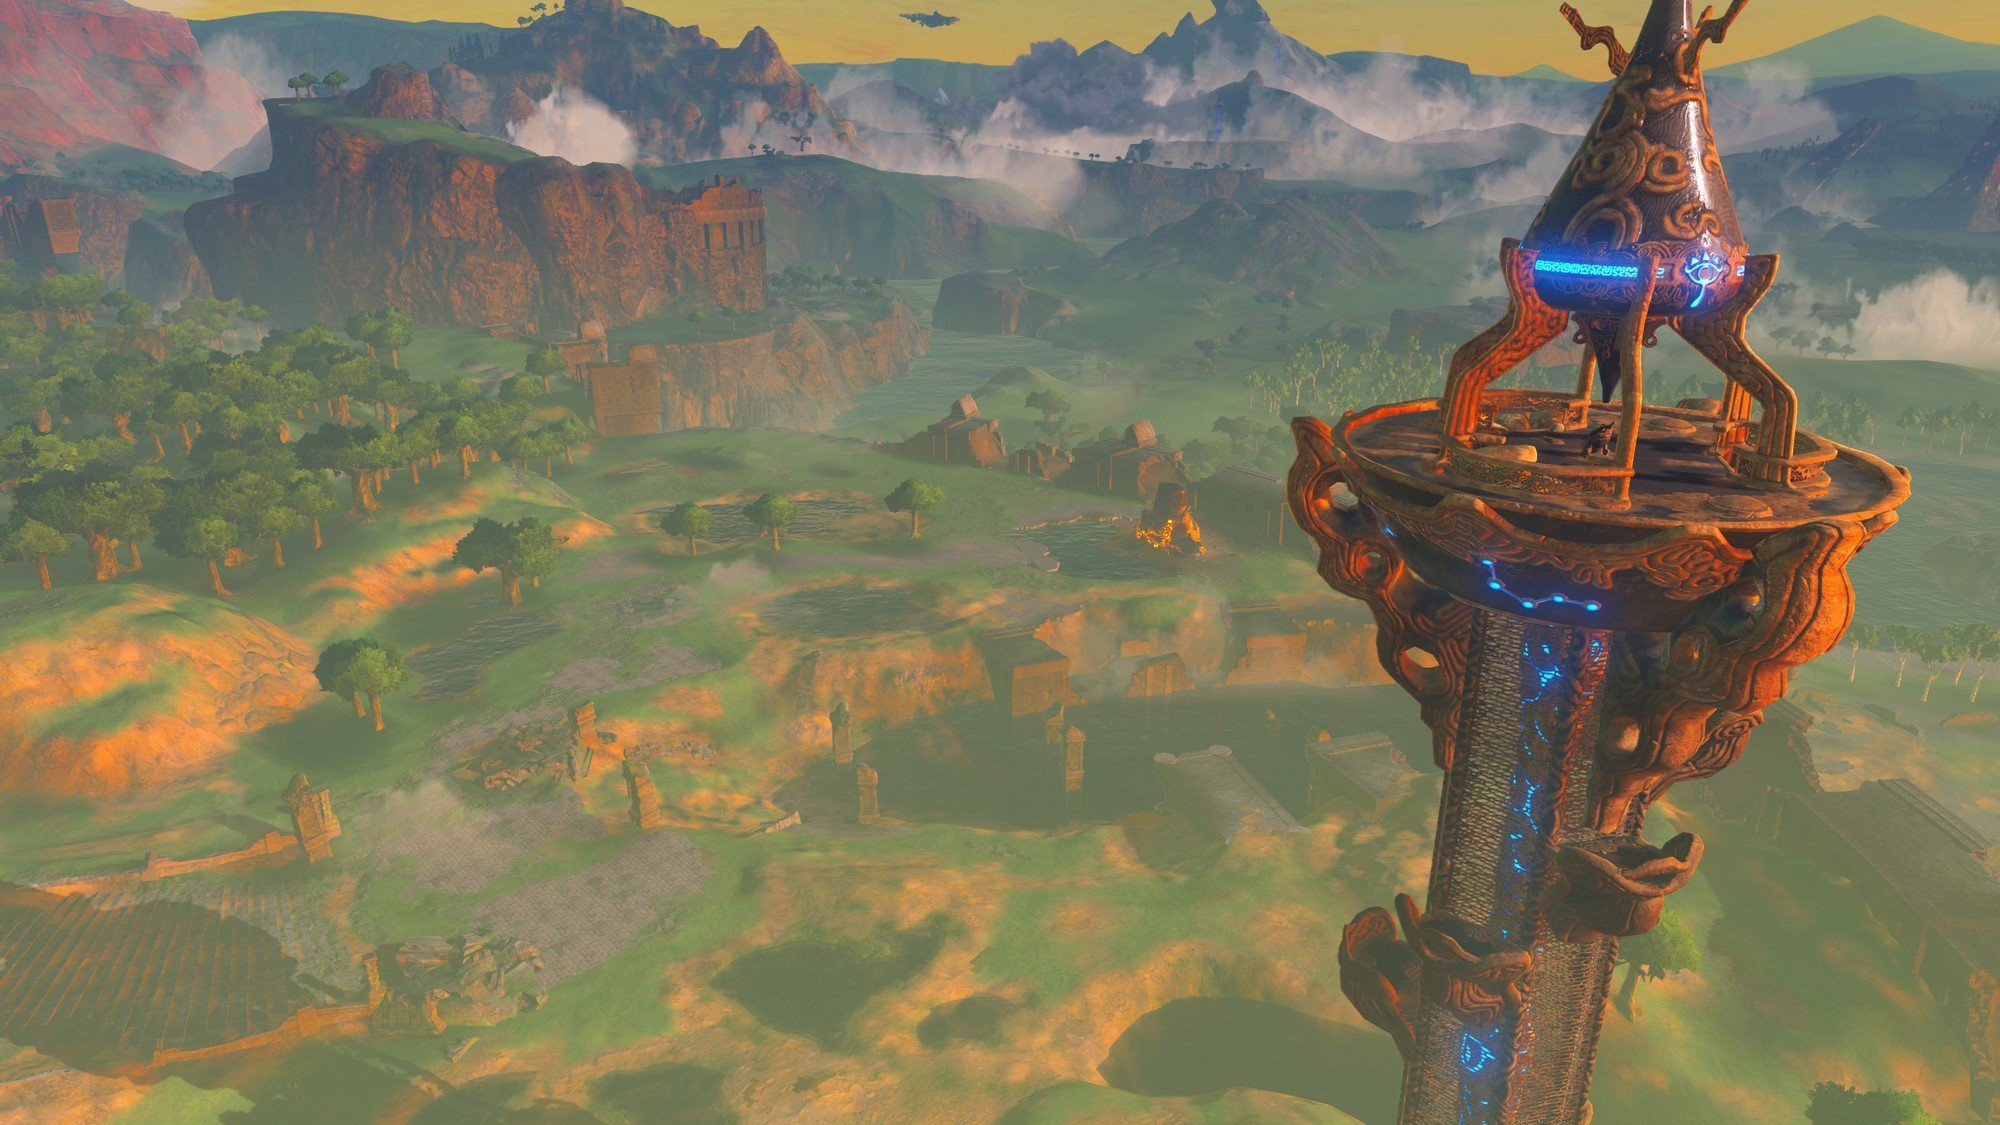 Zelda: Breath of the Wild Shrine locations, Shrine maps for all regions,  and how to trade Shrine Orbs for Heart Containers